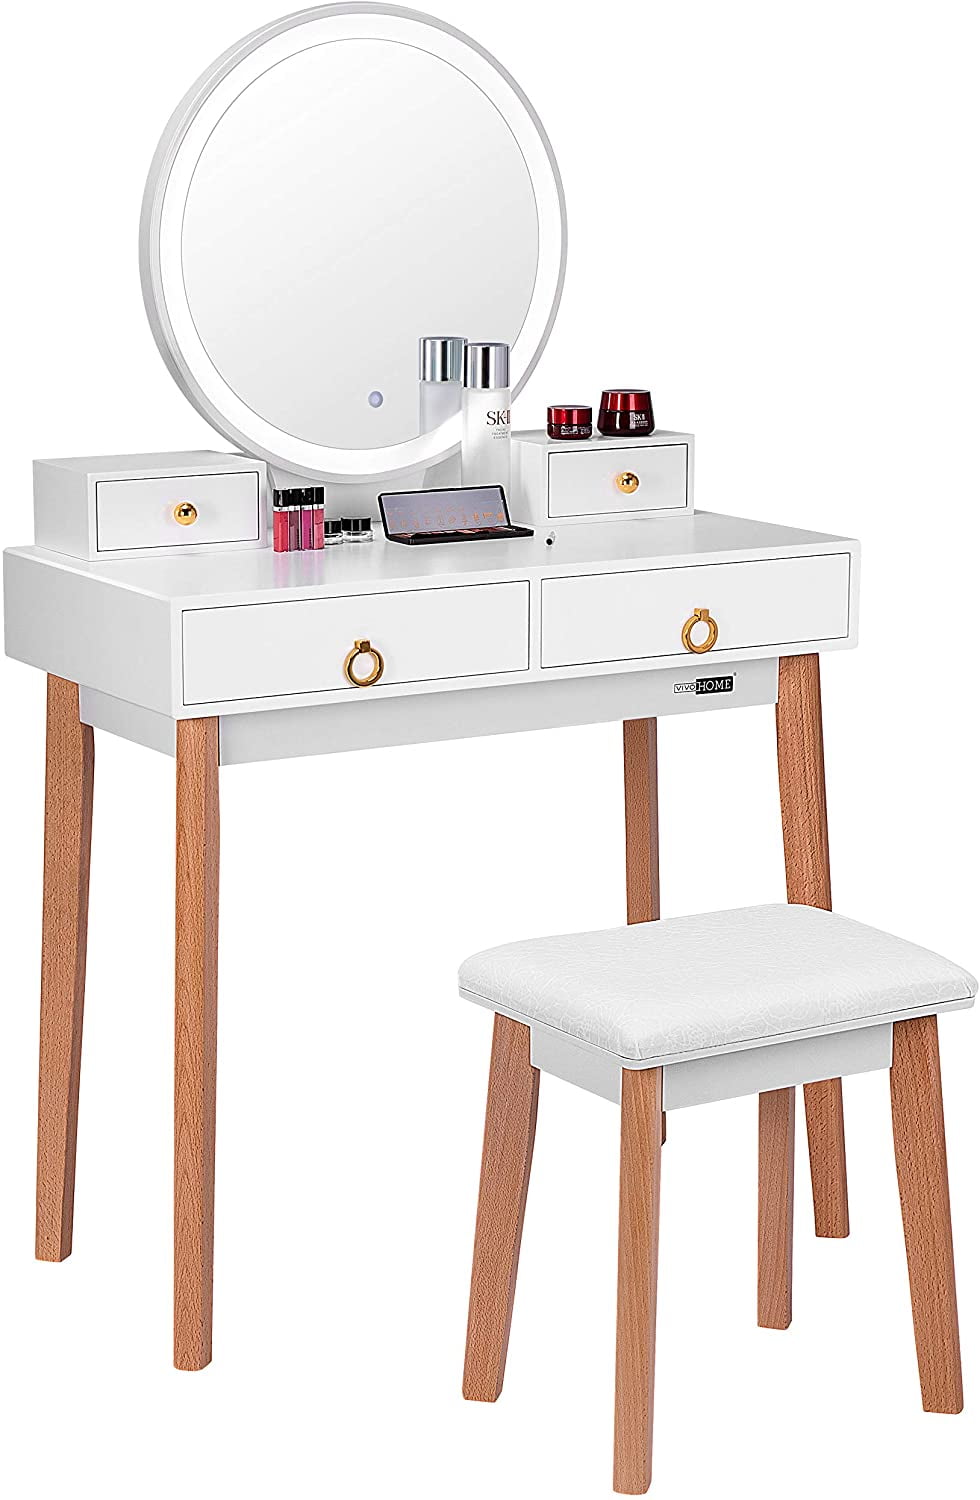 3 Color Modes，Adjustable Brightness，White Vanity Makeup Table Chair Set，4 Drawers Makeup Table with Padded Stool Dressing Table with LED Light Mirror